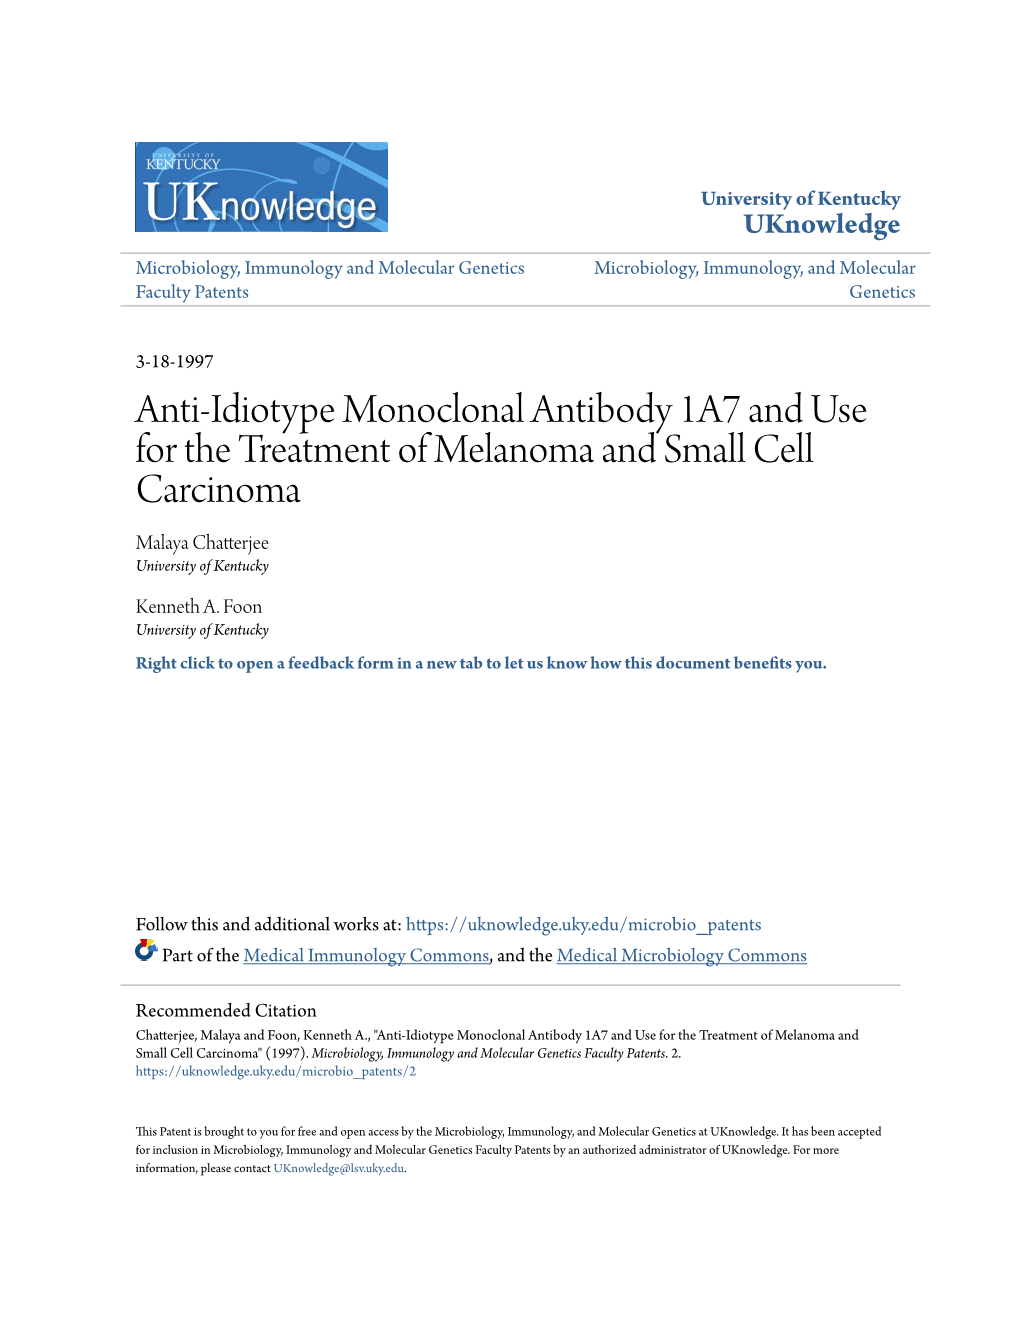 Anti-Idiotype Monoclonal Antibody 1A7 and Use for the Treatment of Melanoma and Small Cell Carcinoma Malaya Chatterjee University of Kentucky